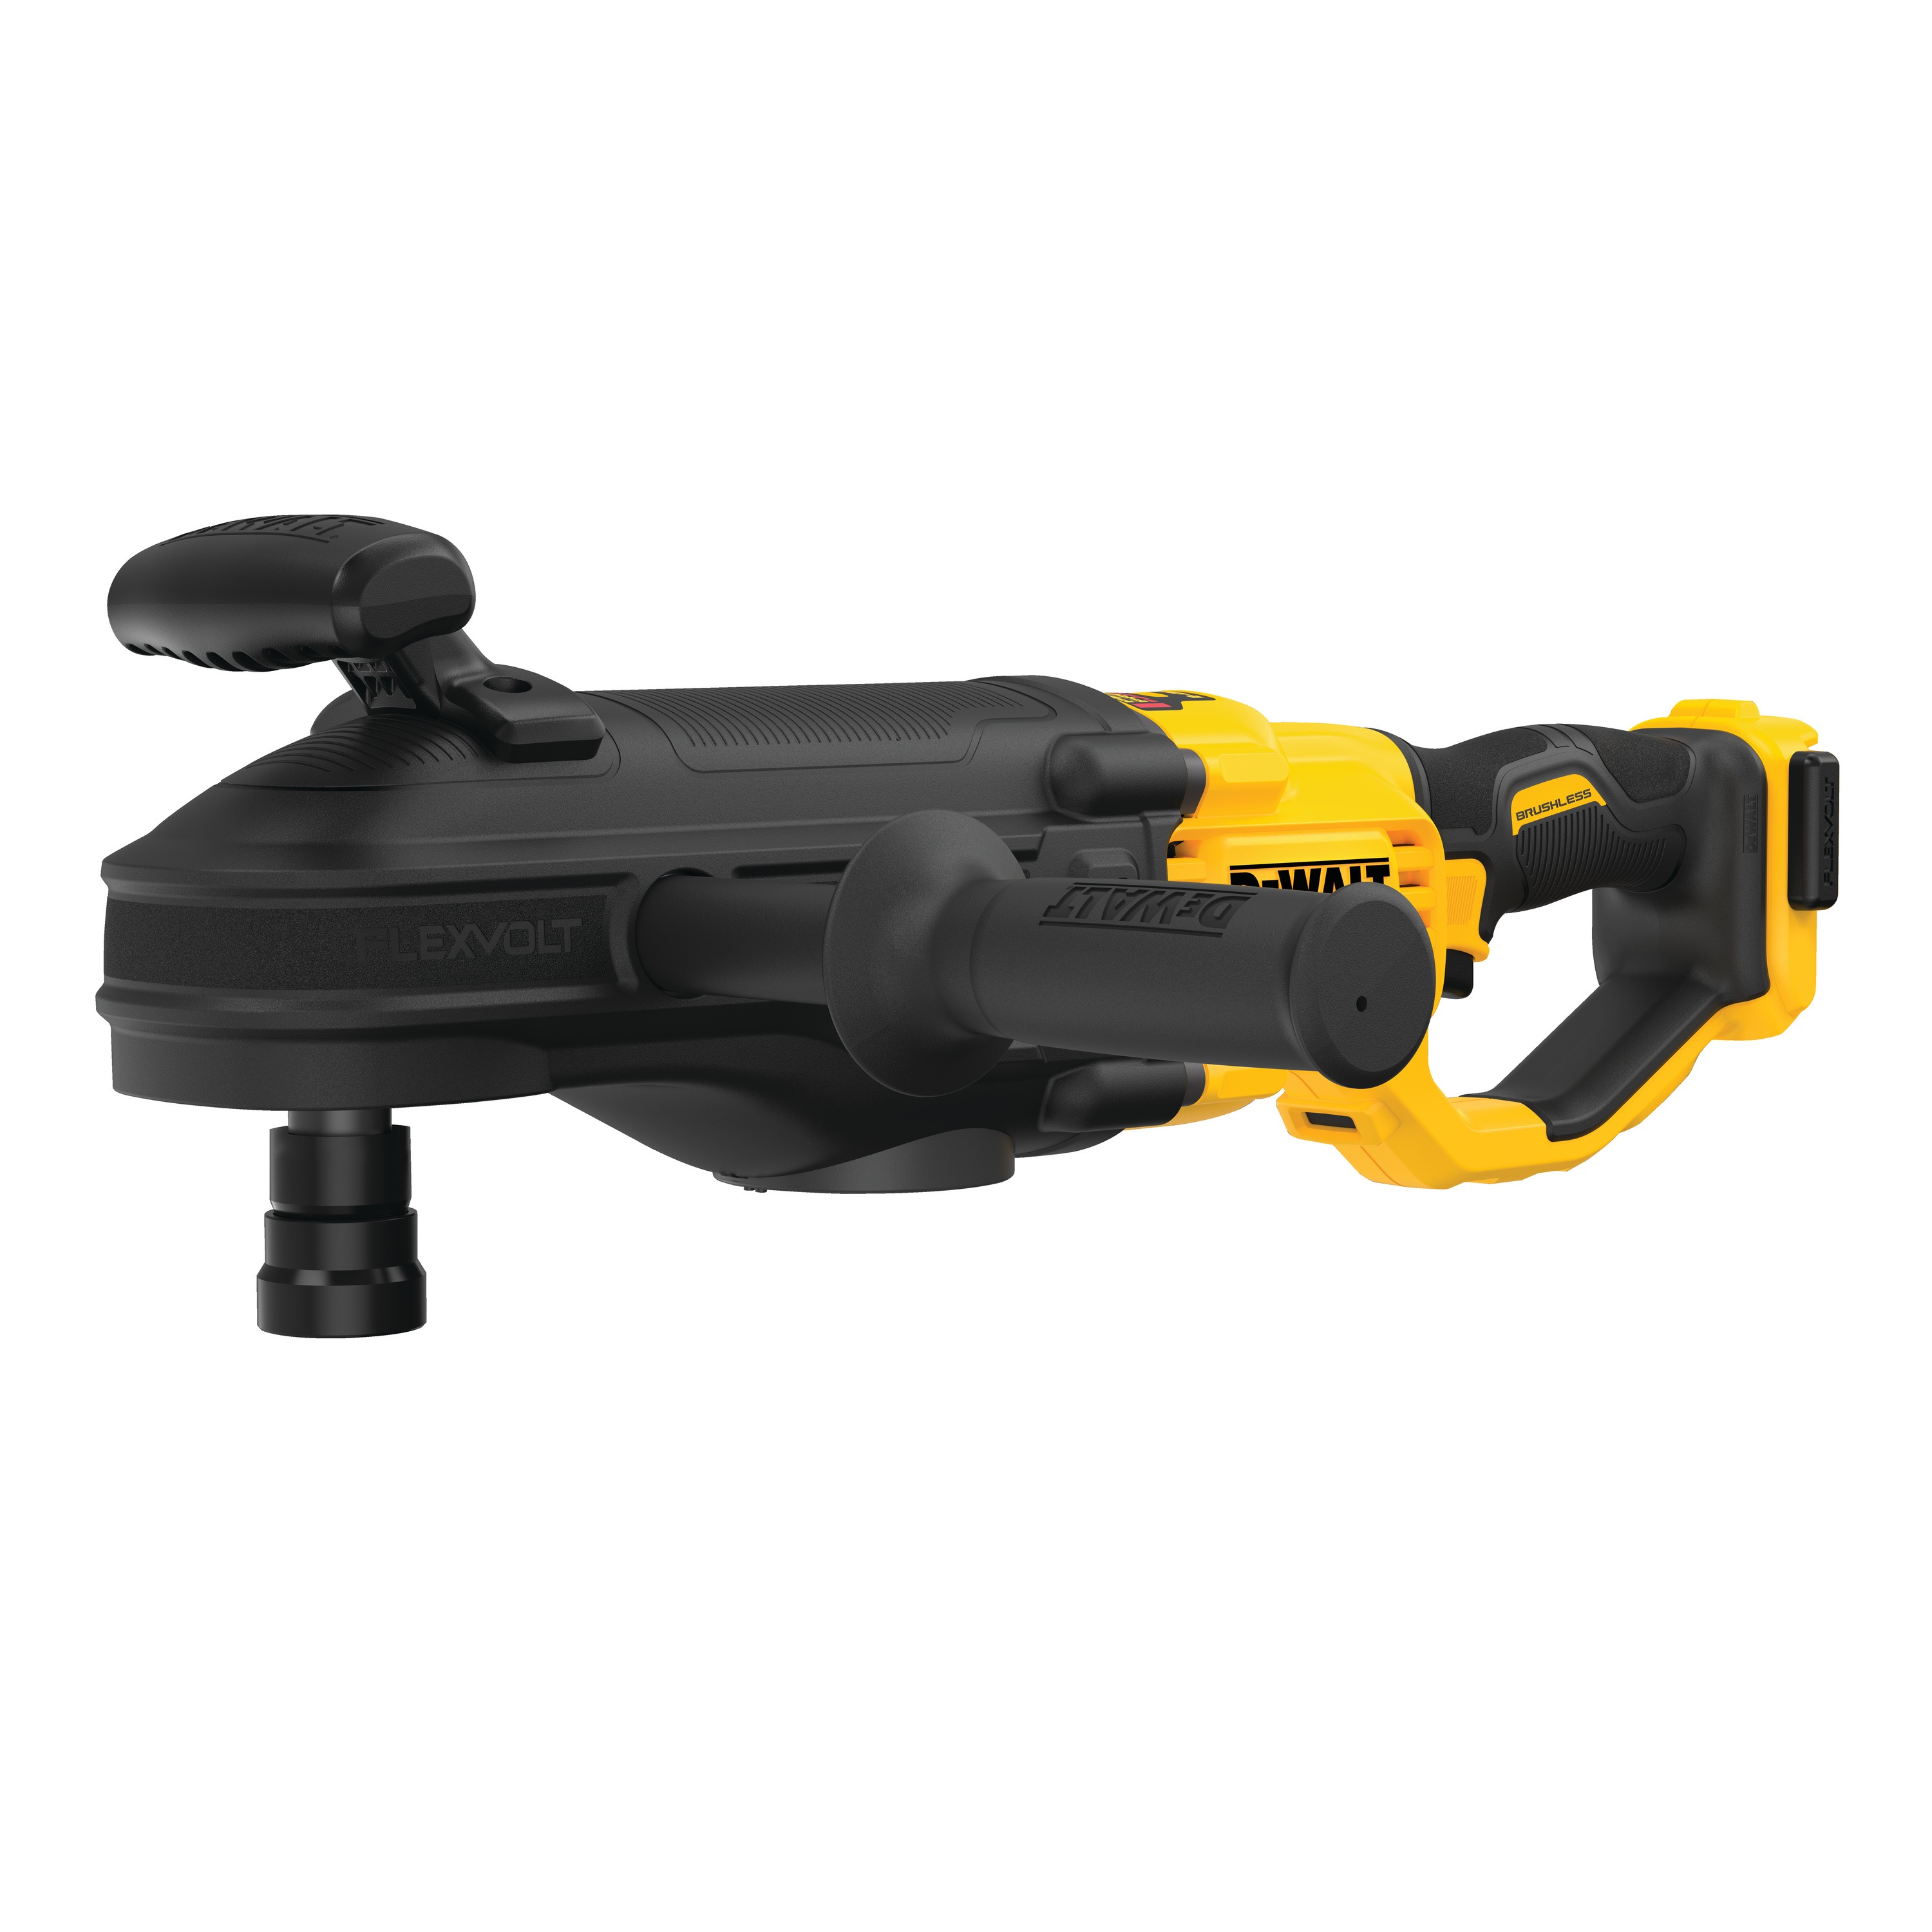 Profile of Brushless cordless quick-change stud and joist drill.